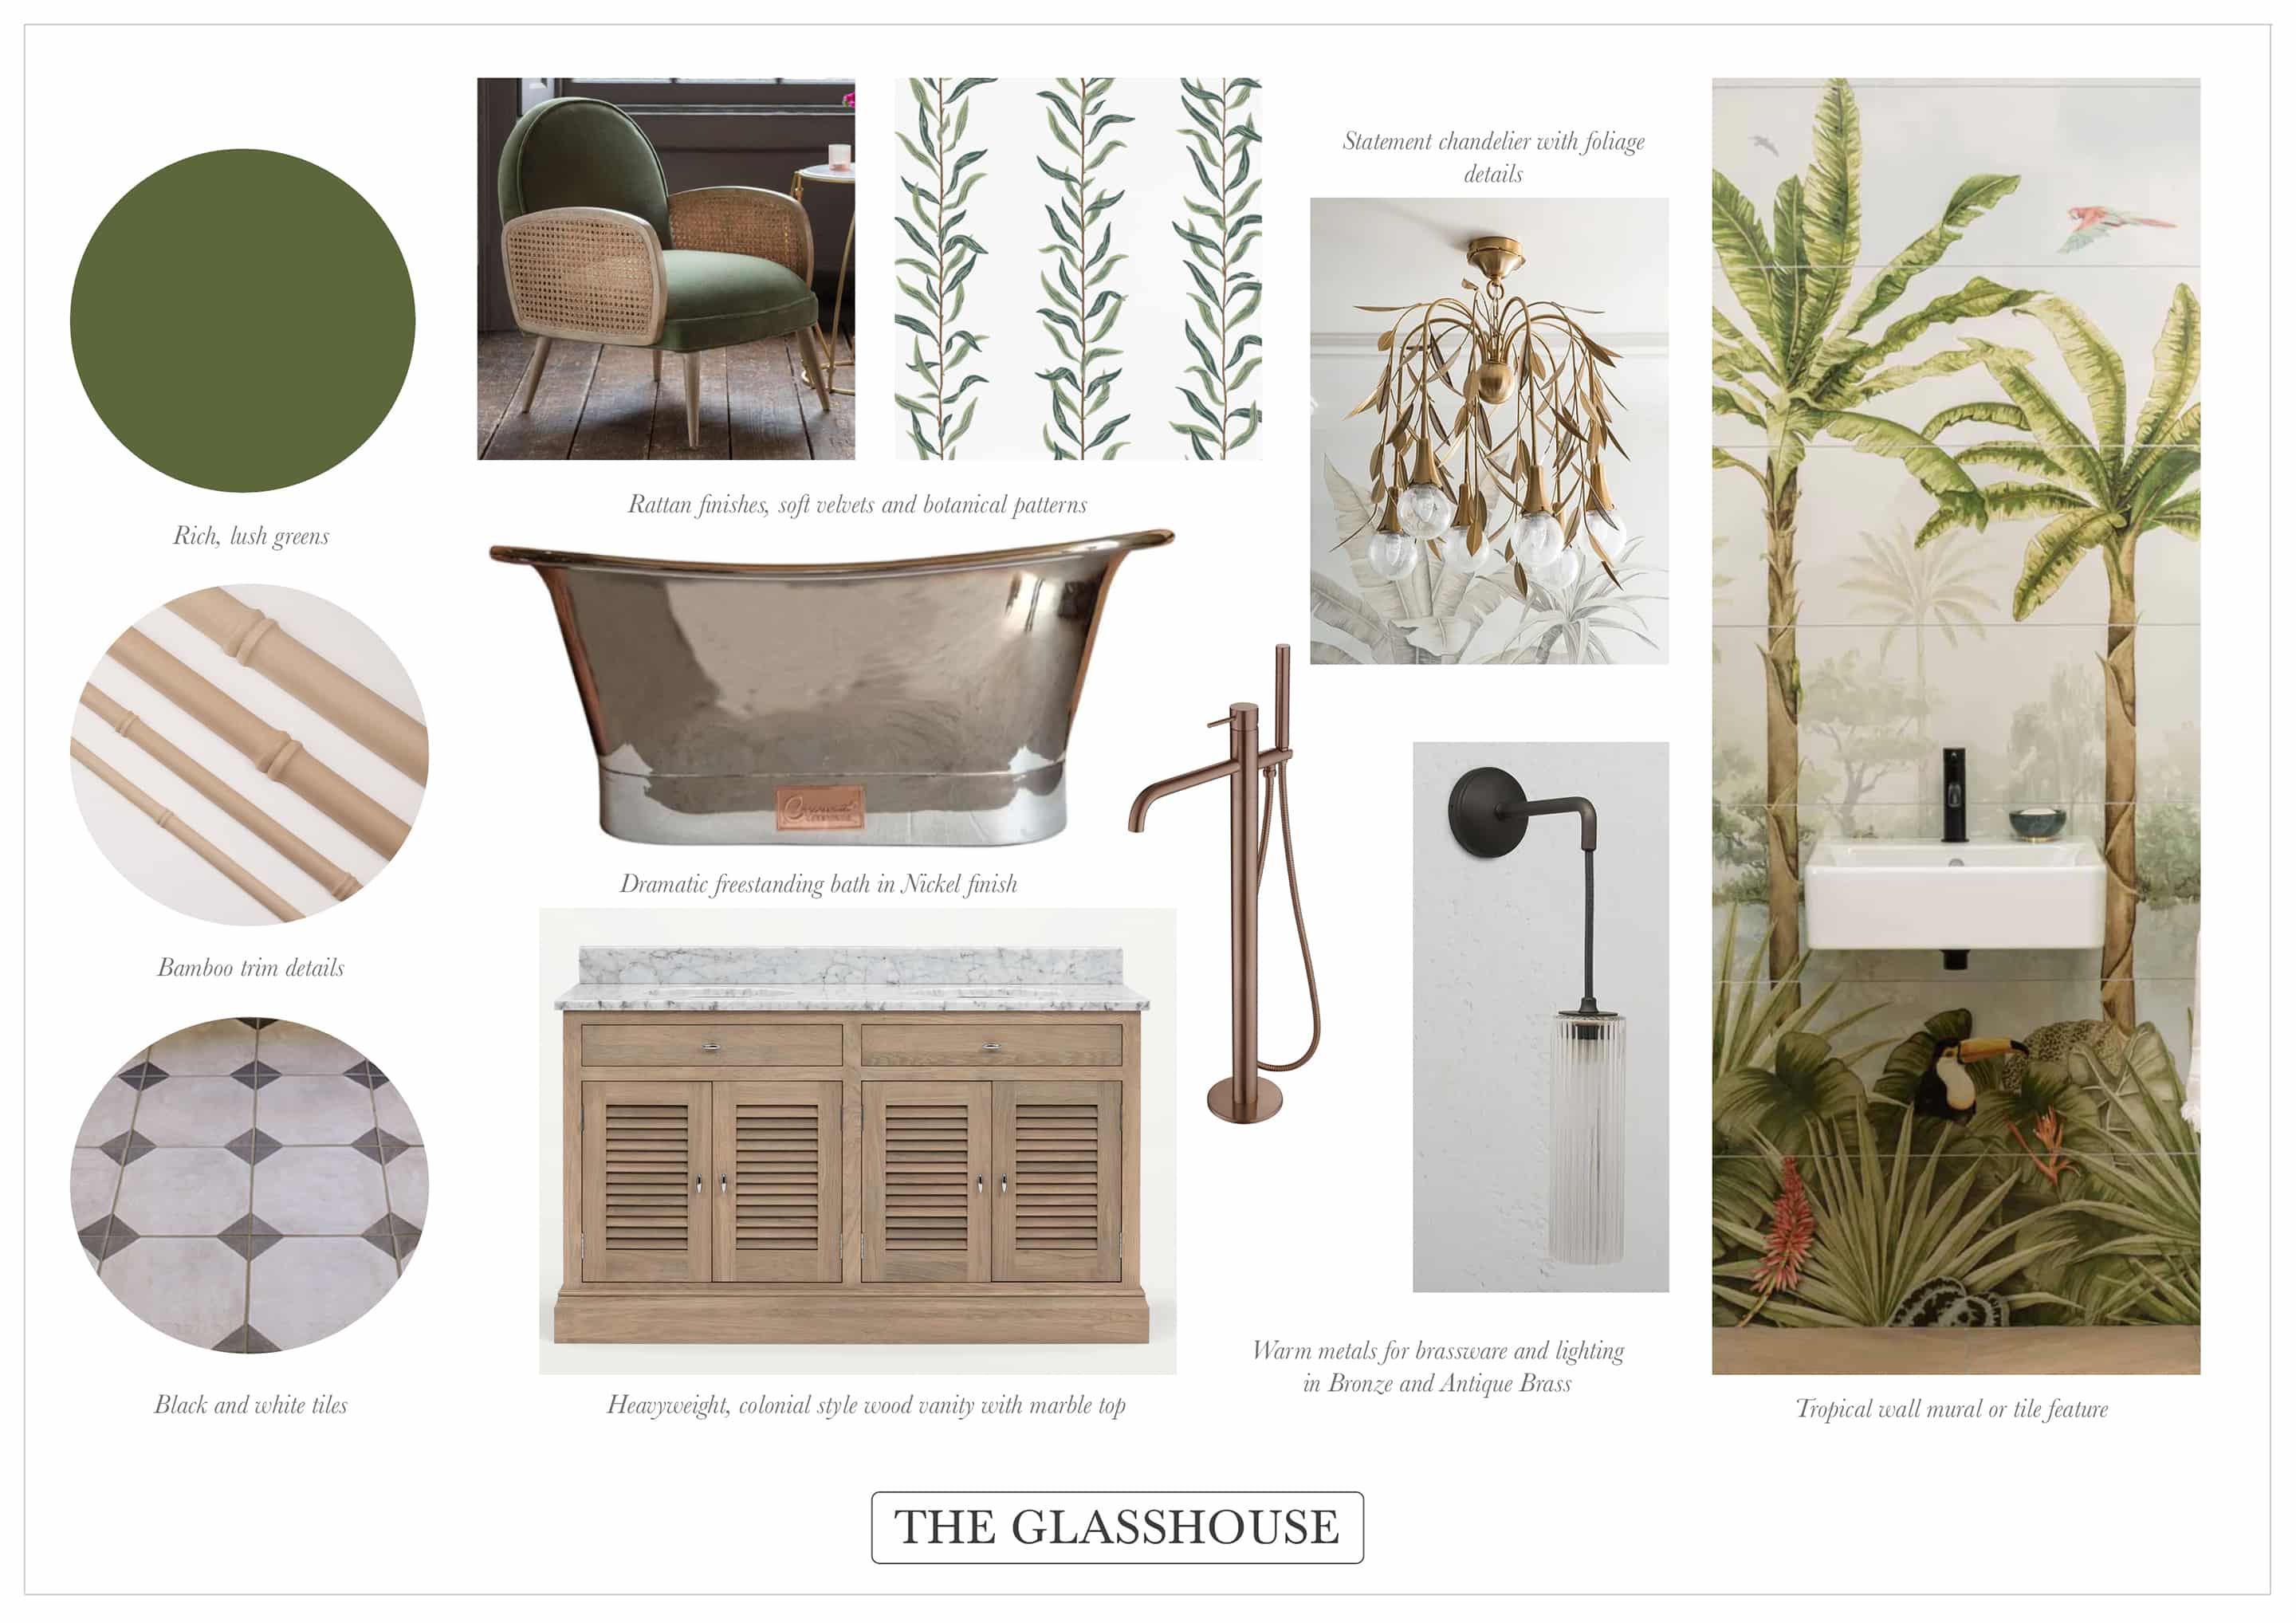 The photo shows a bathroom concept moodboard centred around a glasshouse theme